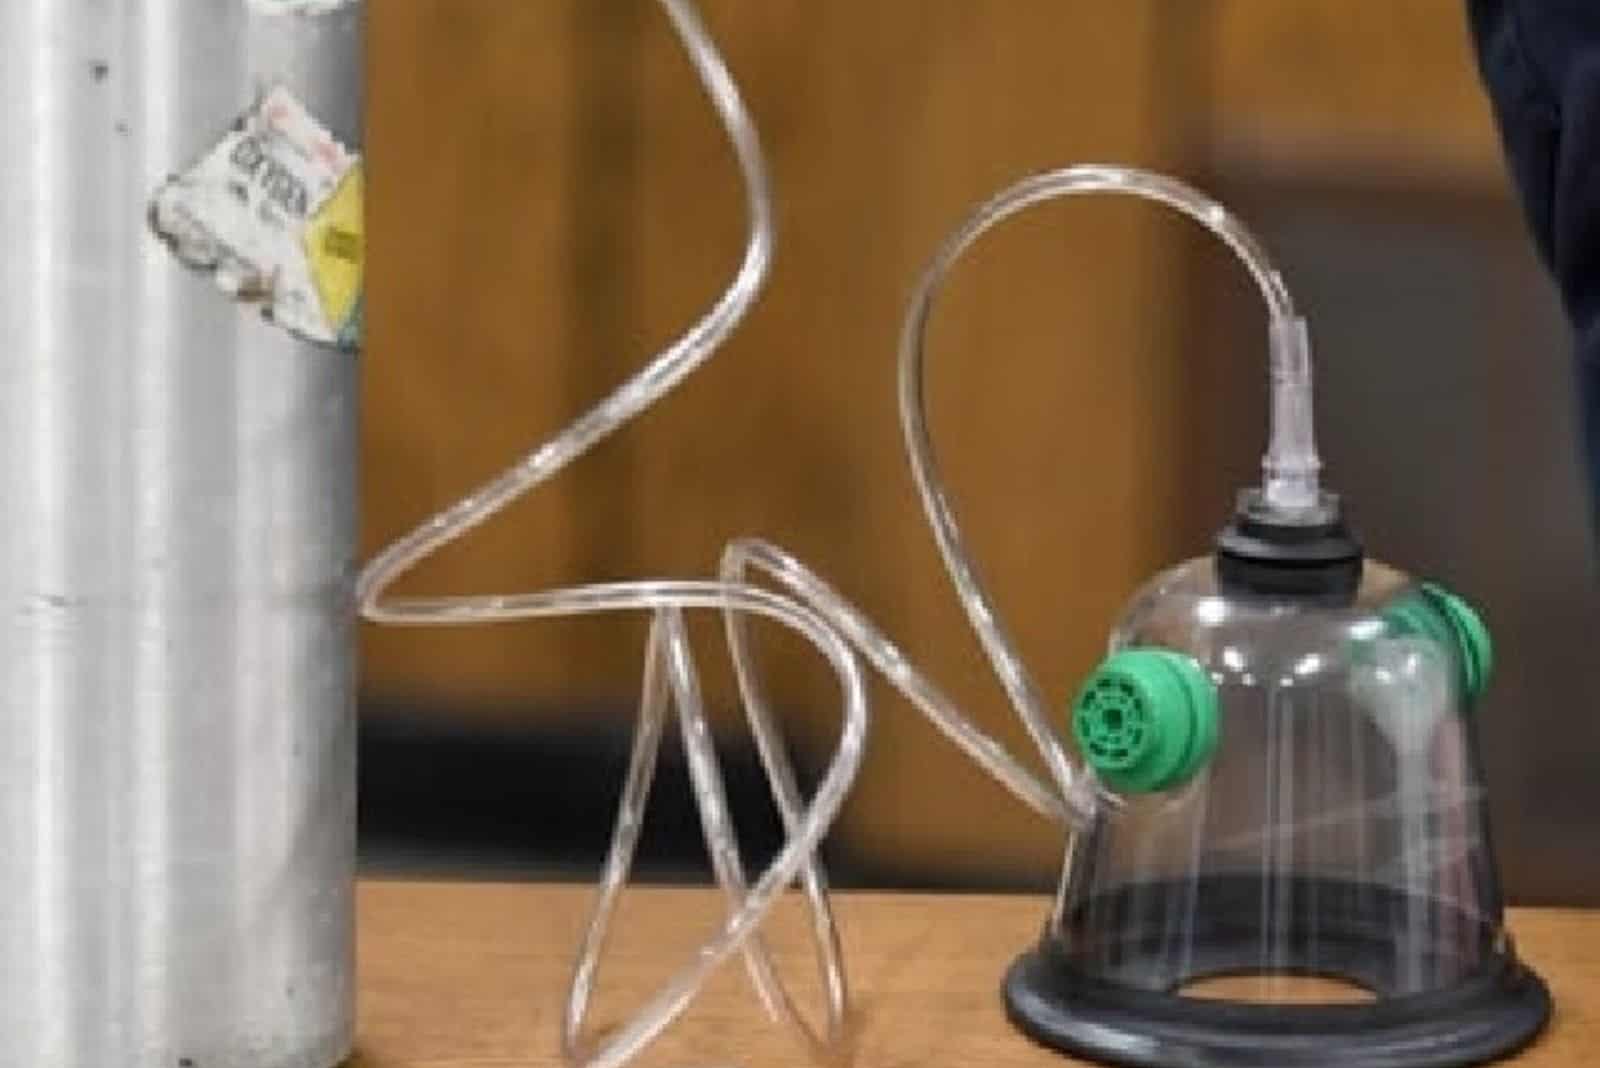 an oxygen mask on the table